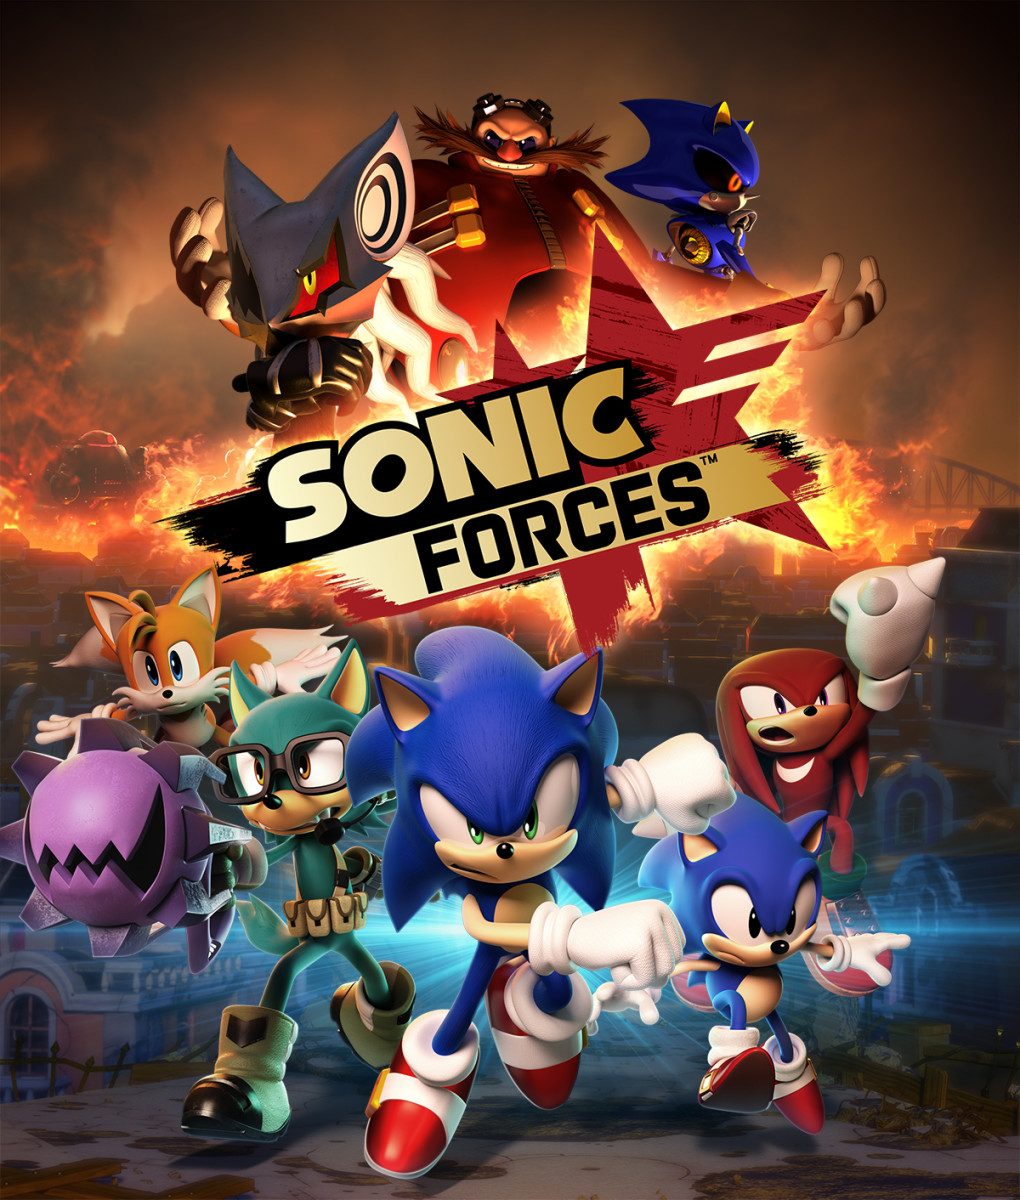 "Sonic Forces" Cover Art